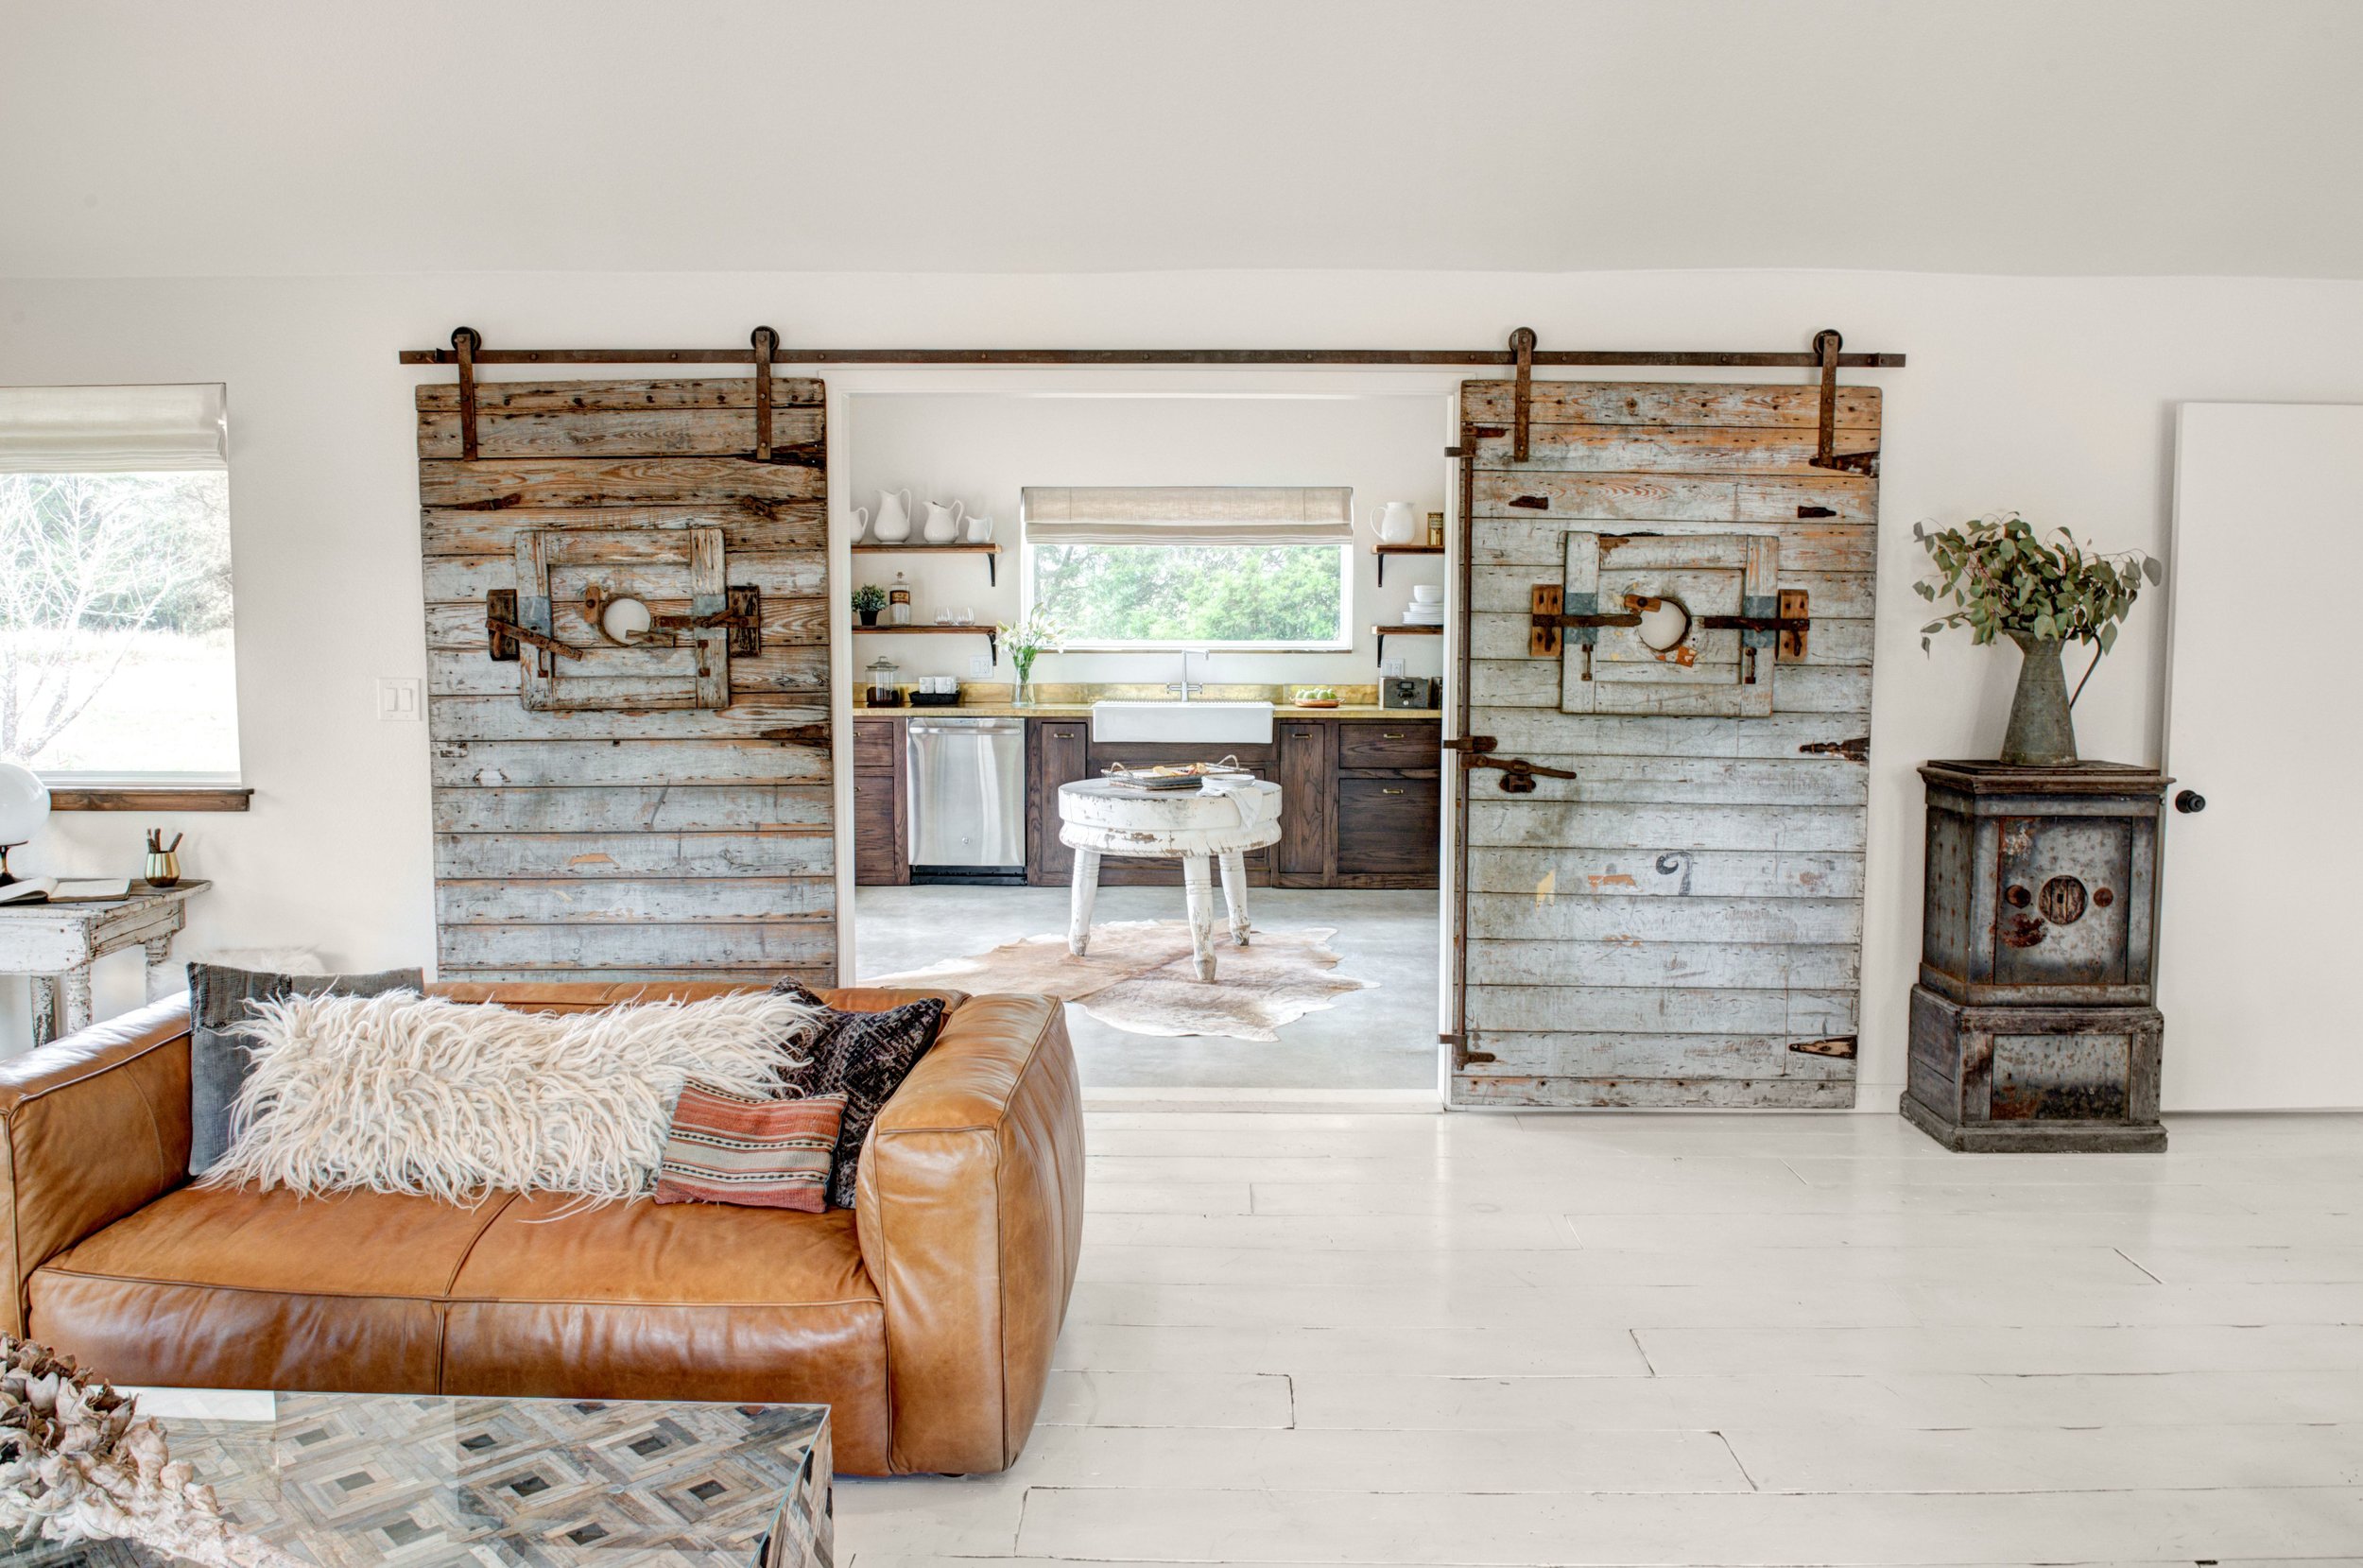   Reclaimed cotton gin doors separate the Boho kitchen from the great room.   